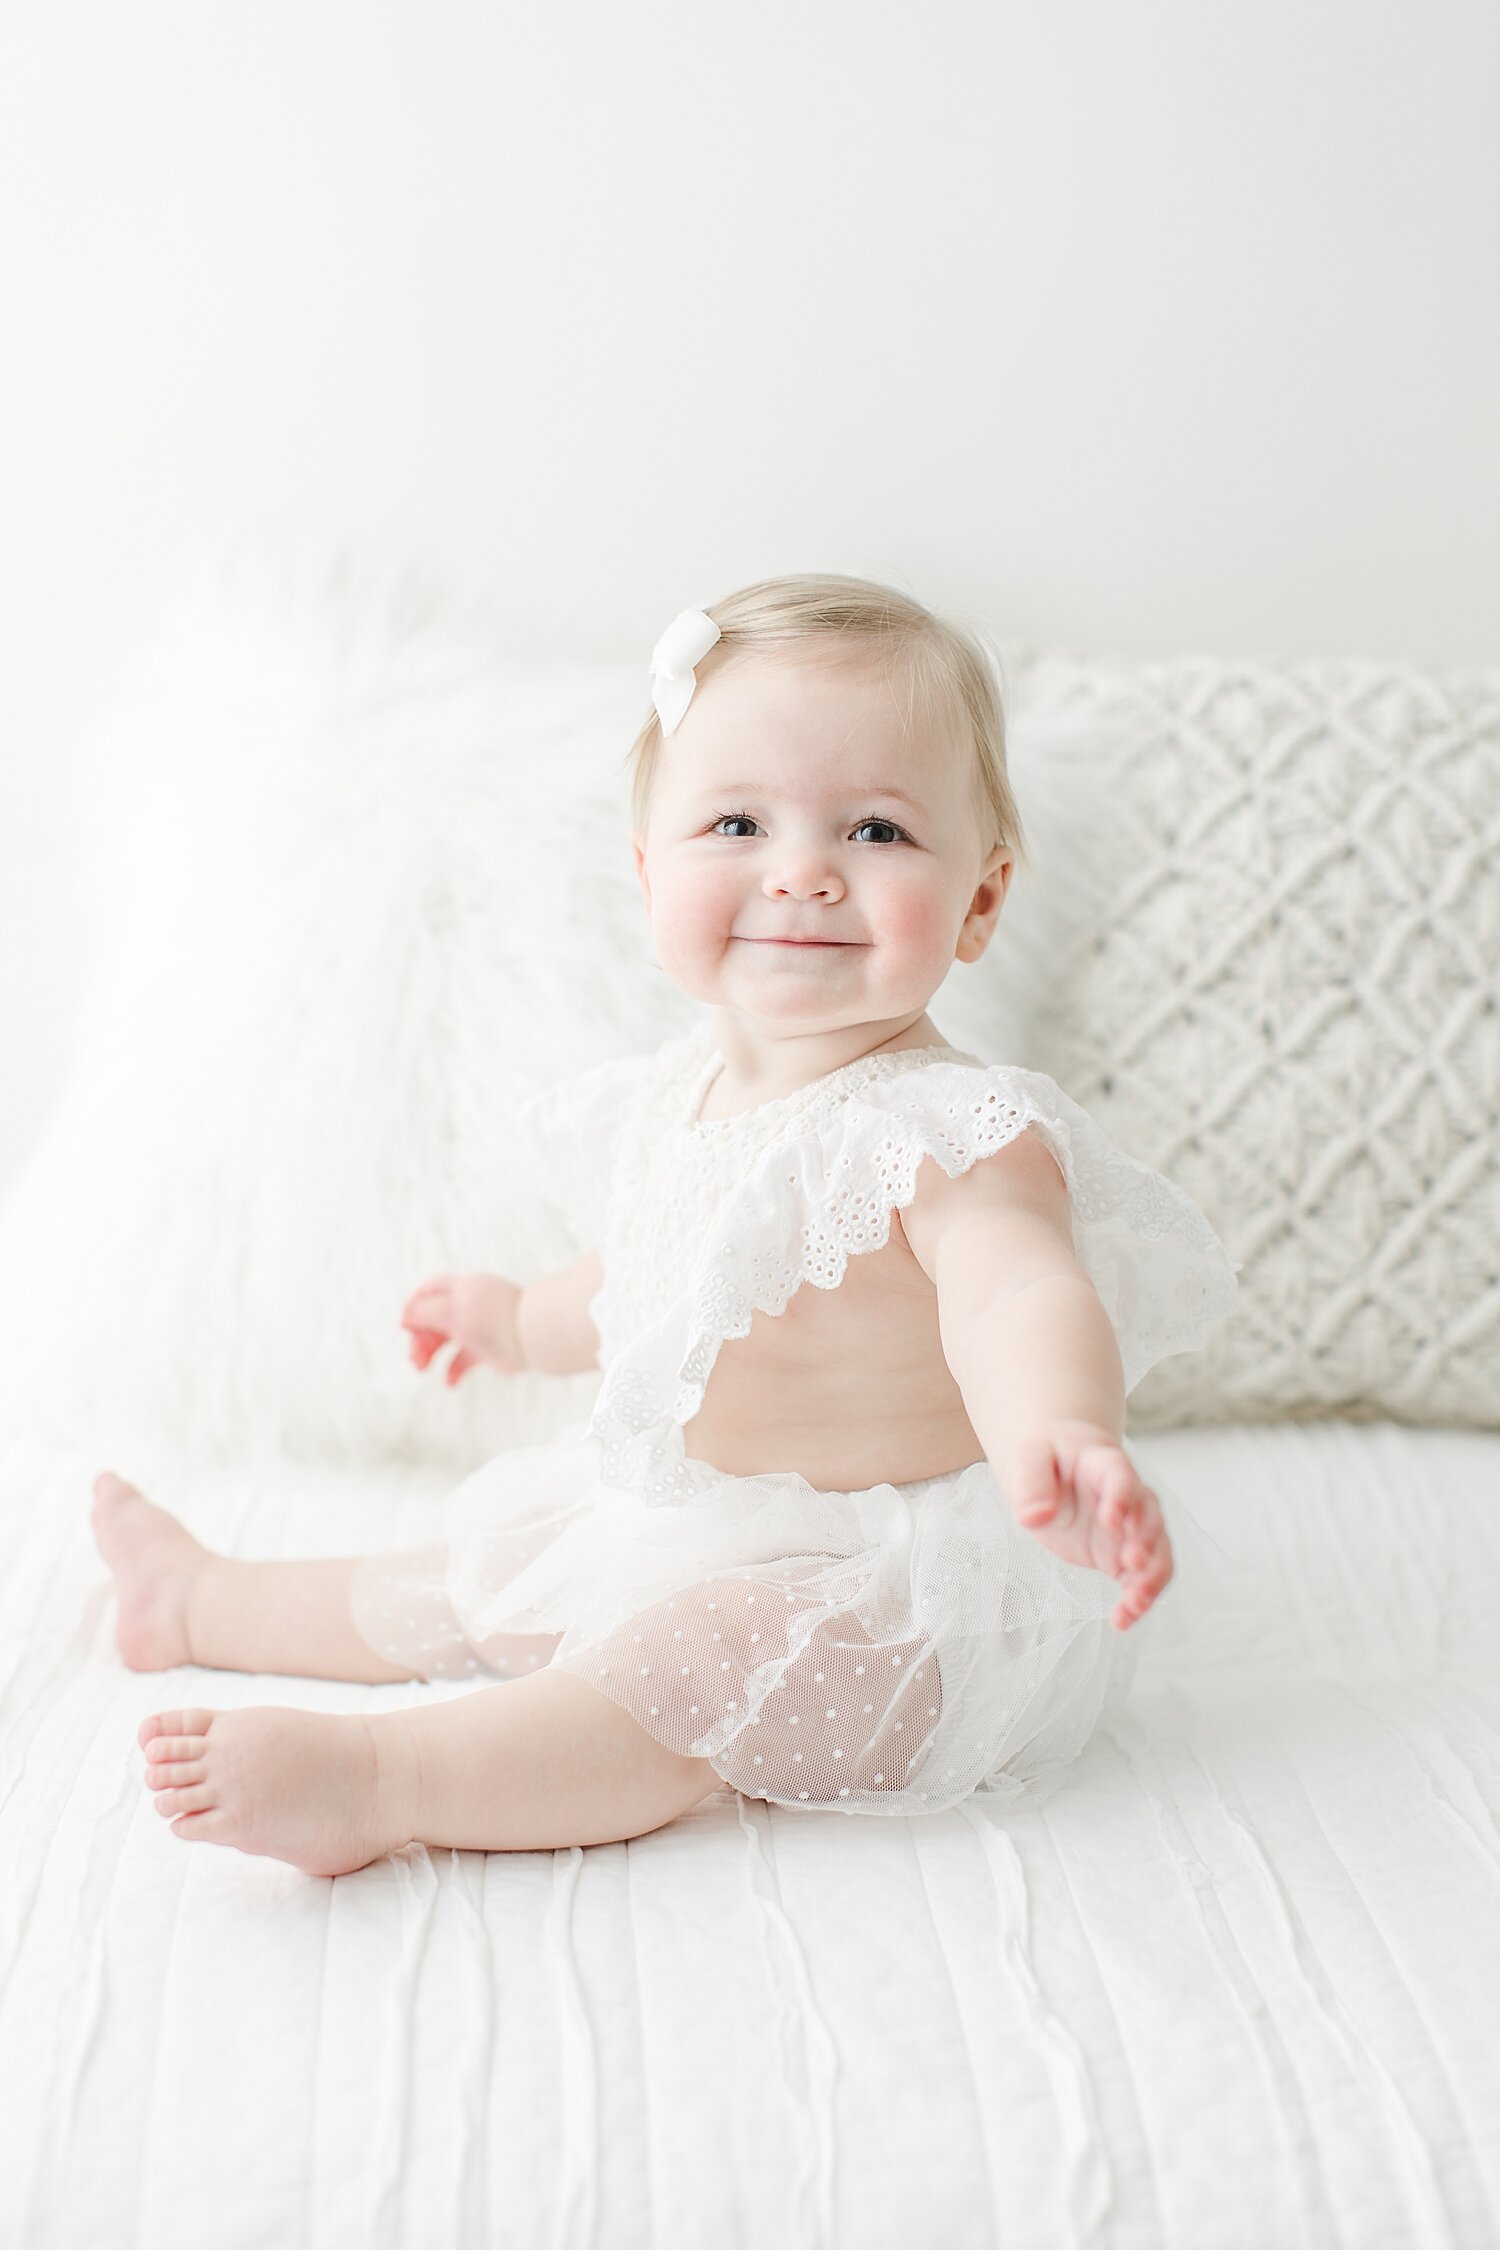 Baby girl smiling for her first birthday session with Kristin Wood Photography in Darien, CT.